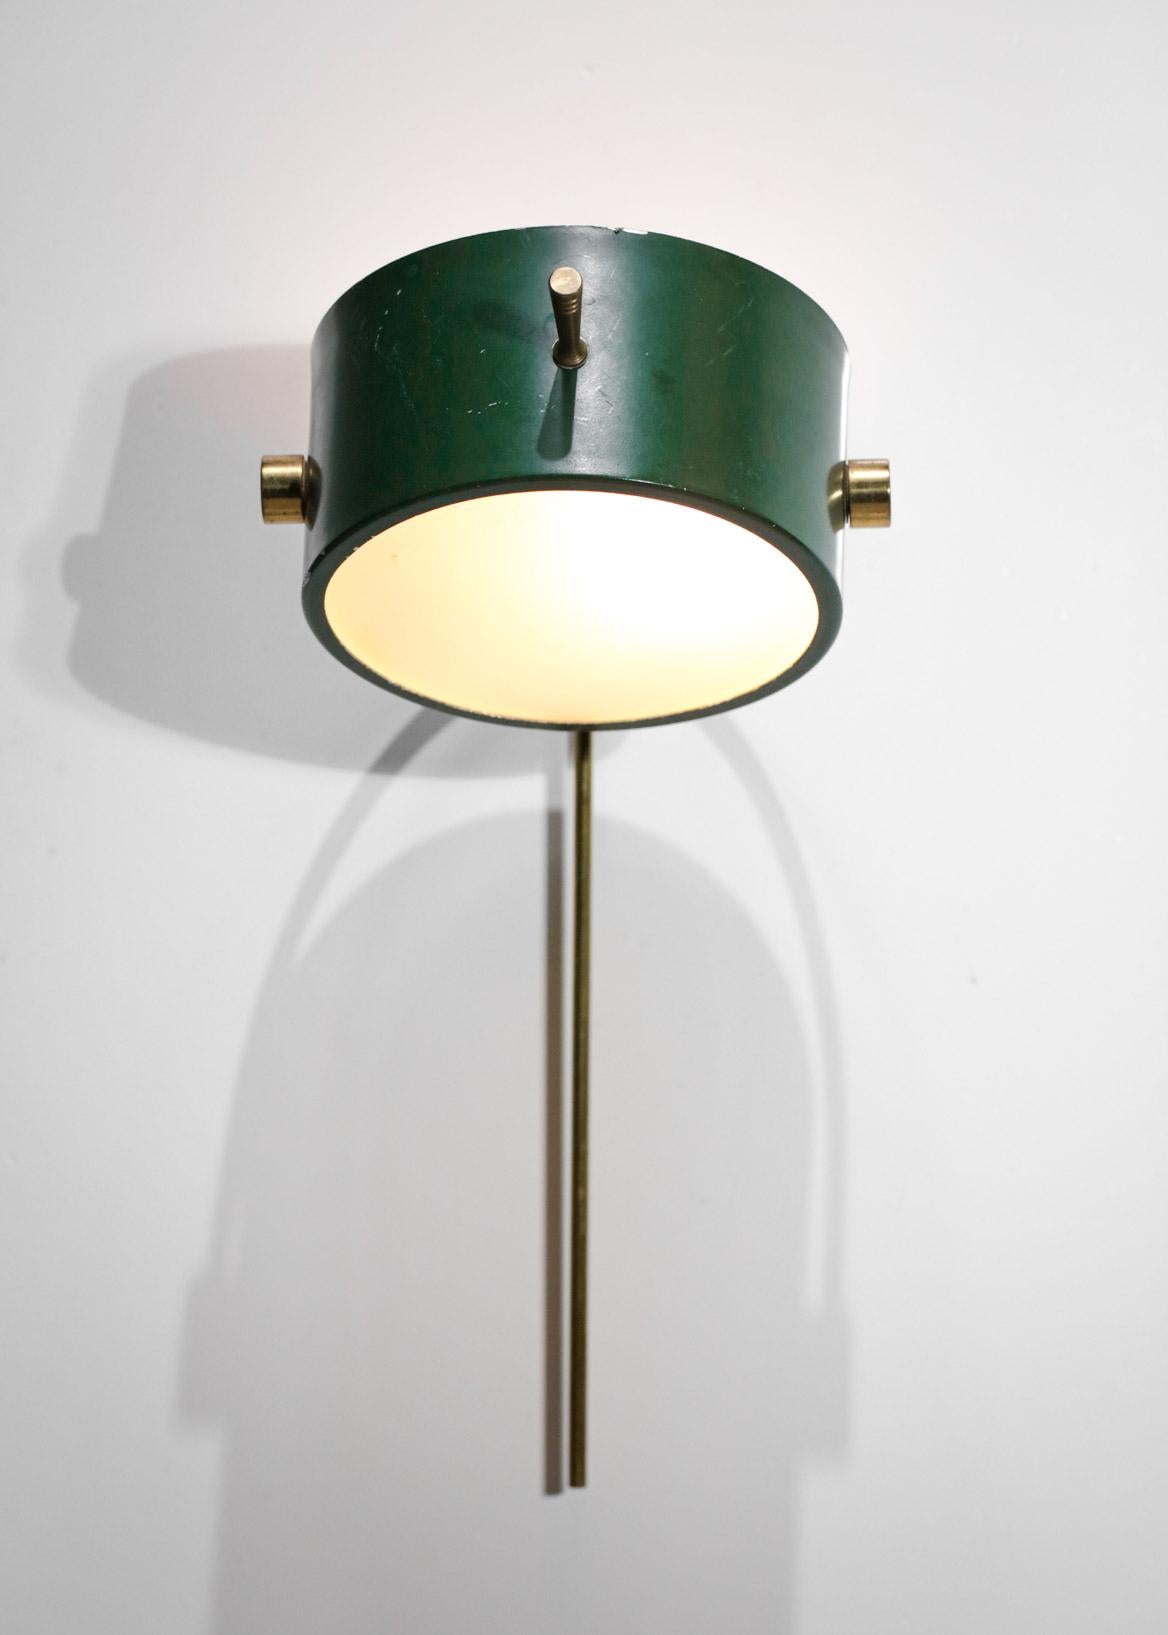 Mid-20th Century Rare 50's French Wall Lamp by Lunel Dark Green in Style of Mathieu Mategot, F420